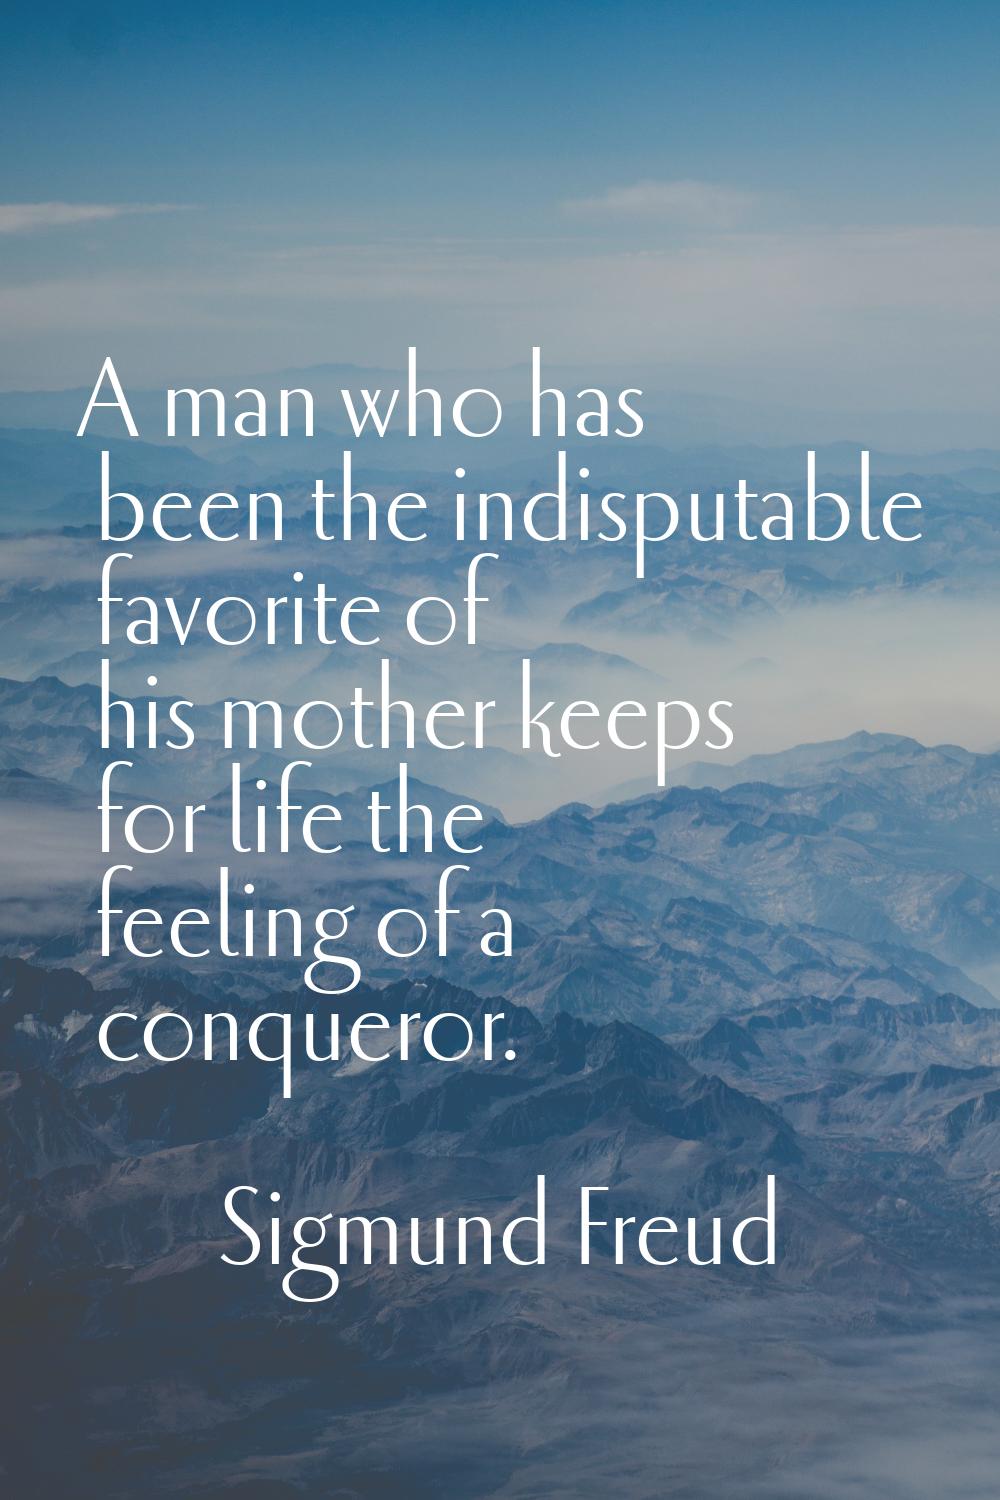 A man who has been the indisputable favorite of his mother keeps for life the feeling of a conquero